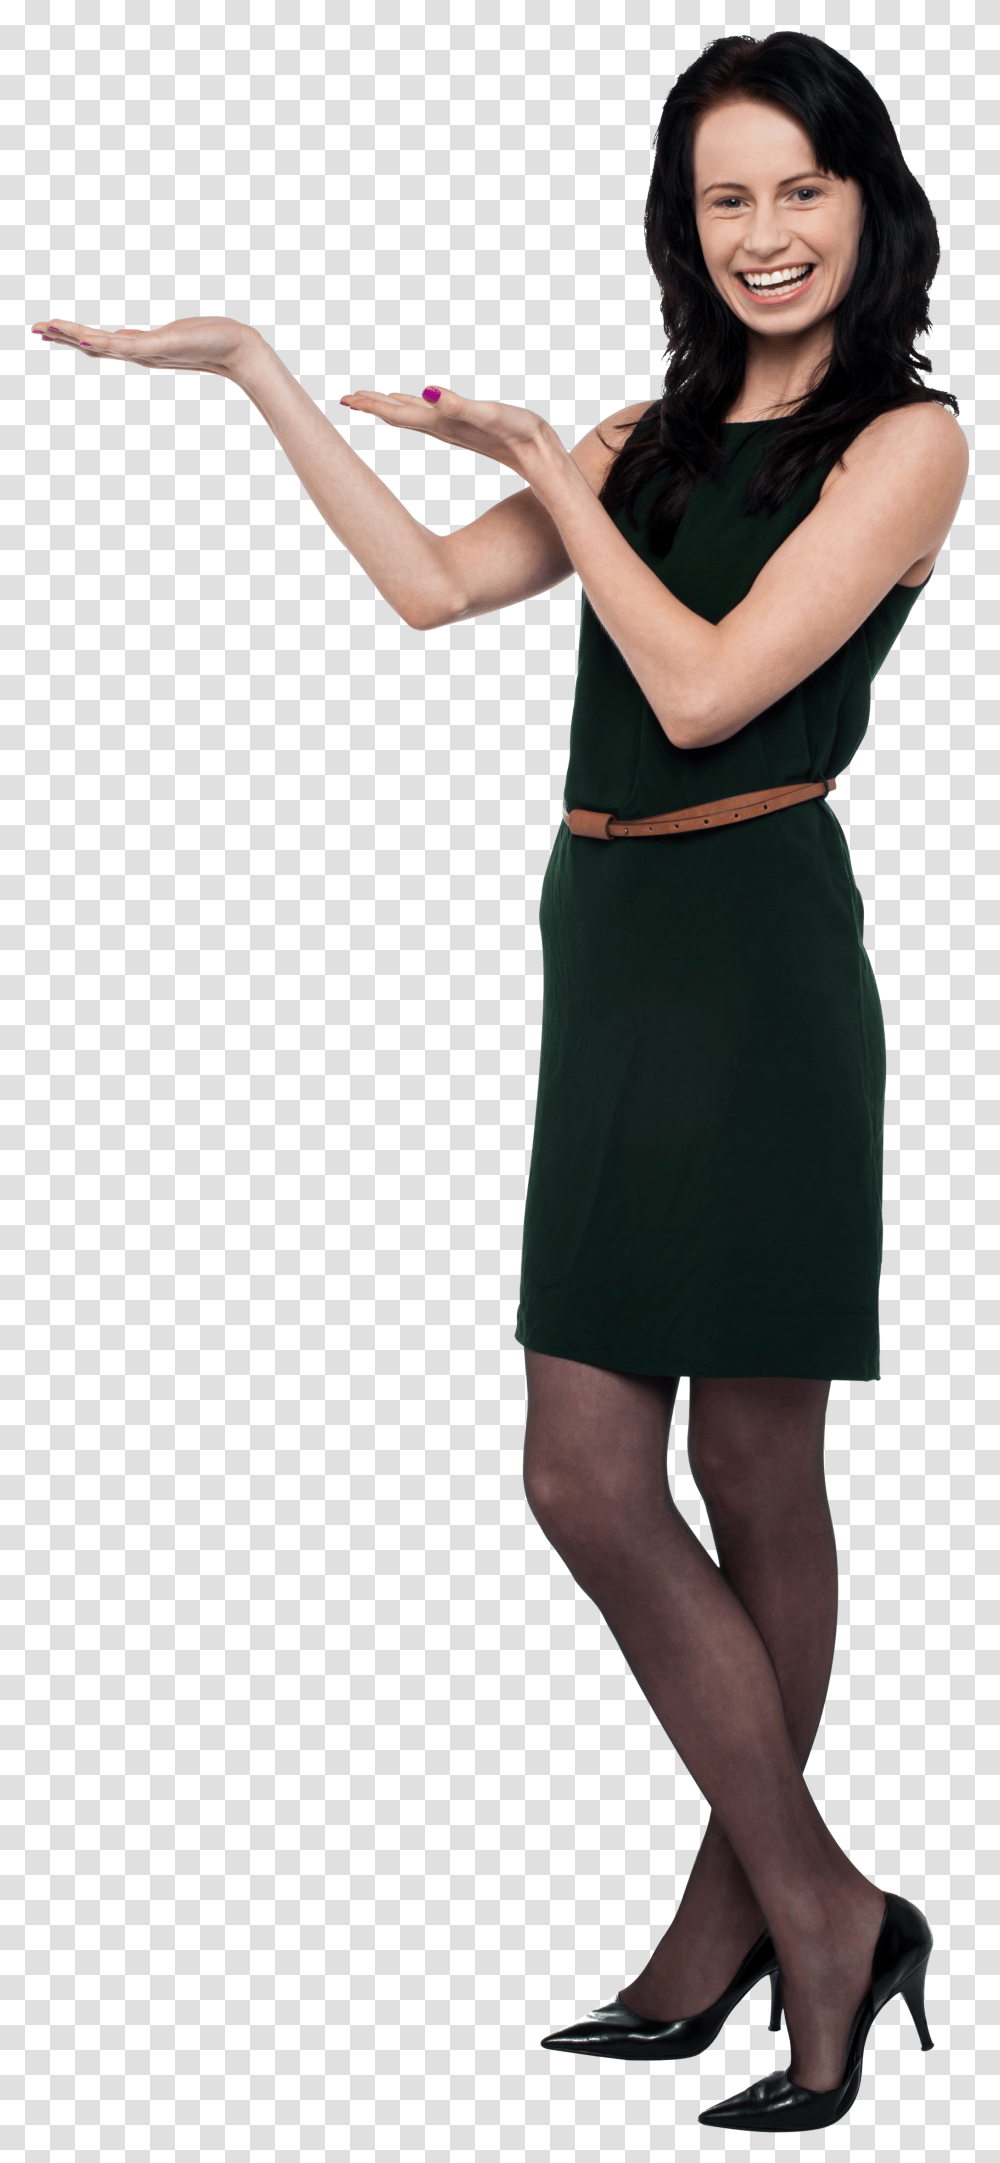 Women Pointing Left Image For Free Download Women Pointing Left, Clothing, Dress, Female, Person Transparent Png